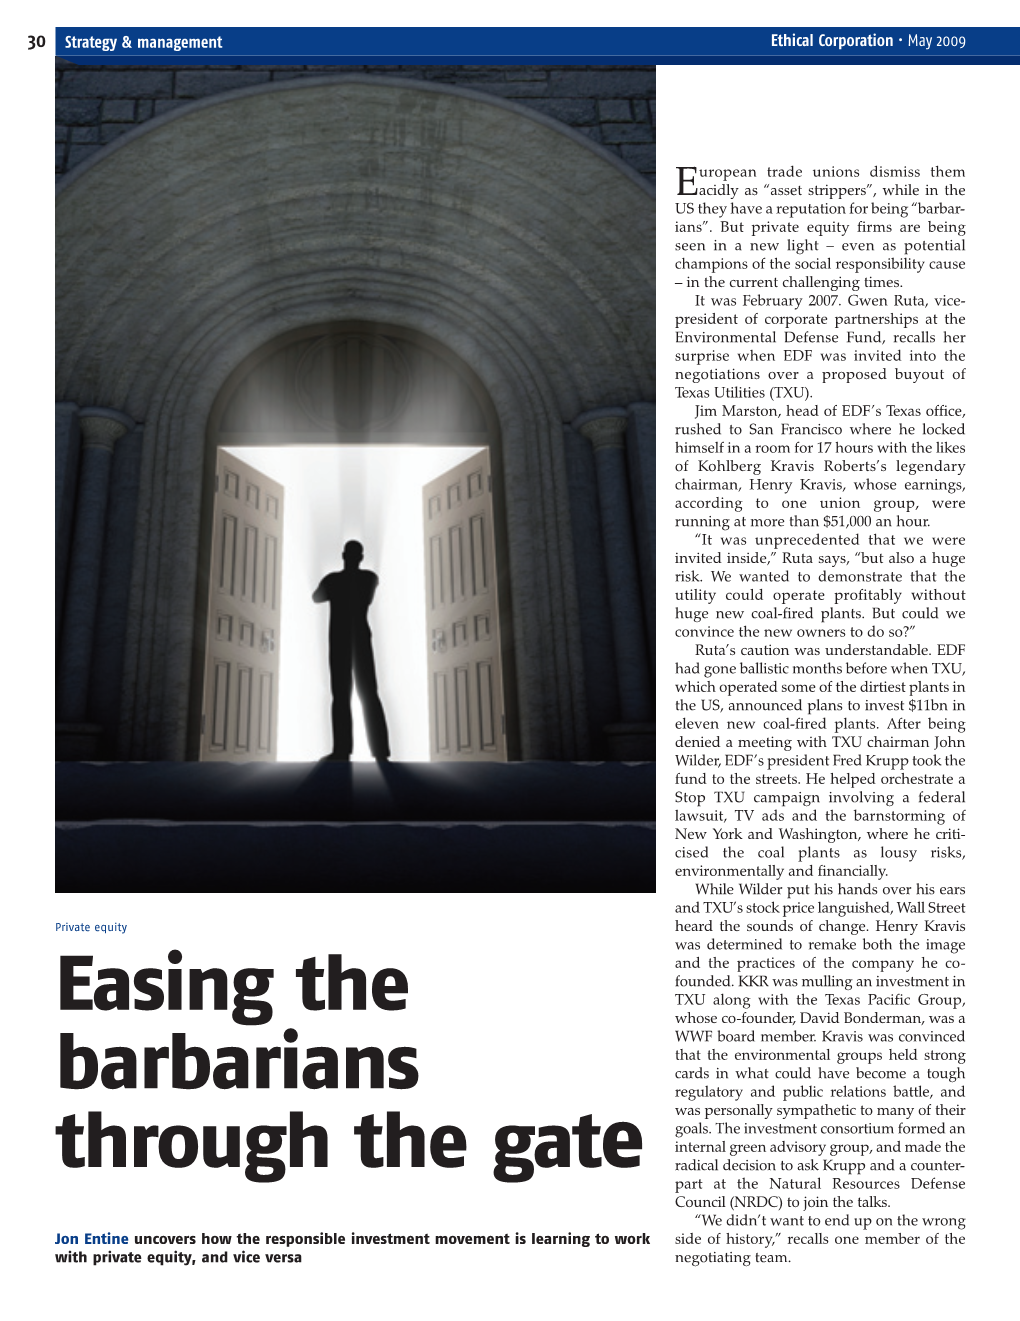 Easing the Barbarians Through the Gate